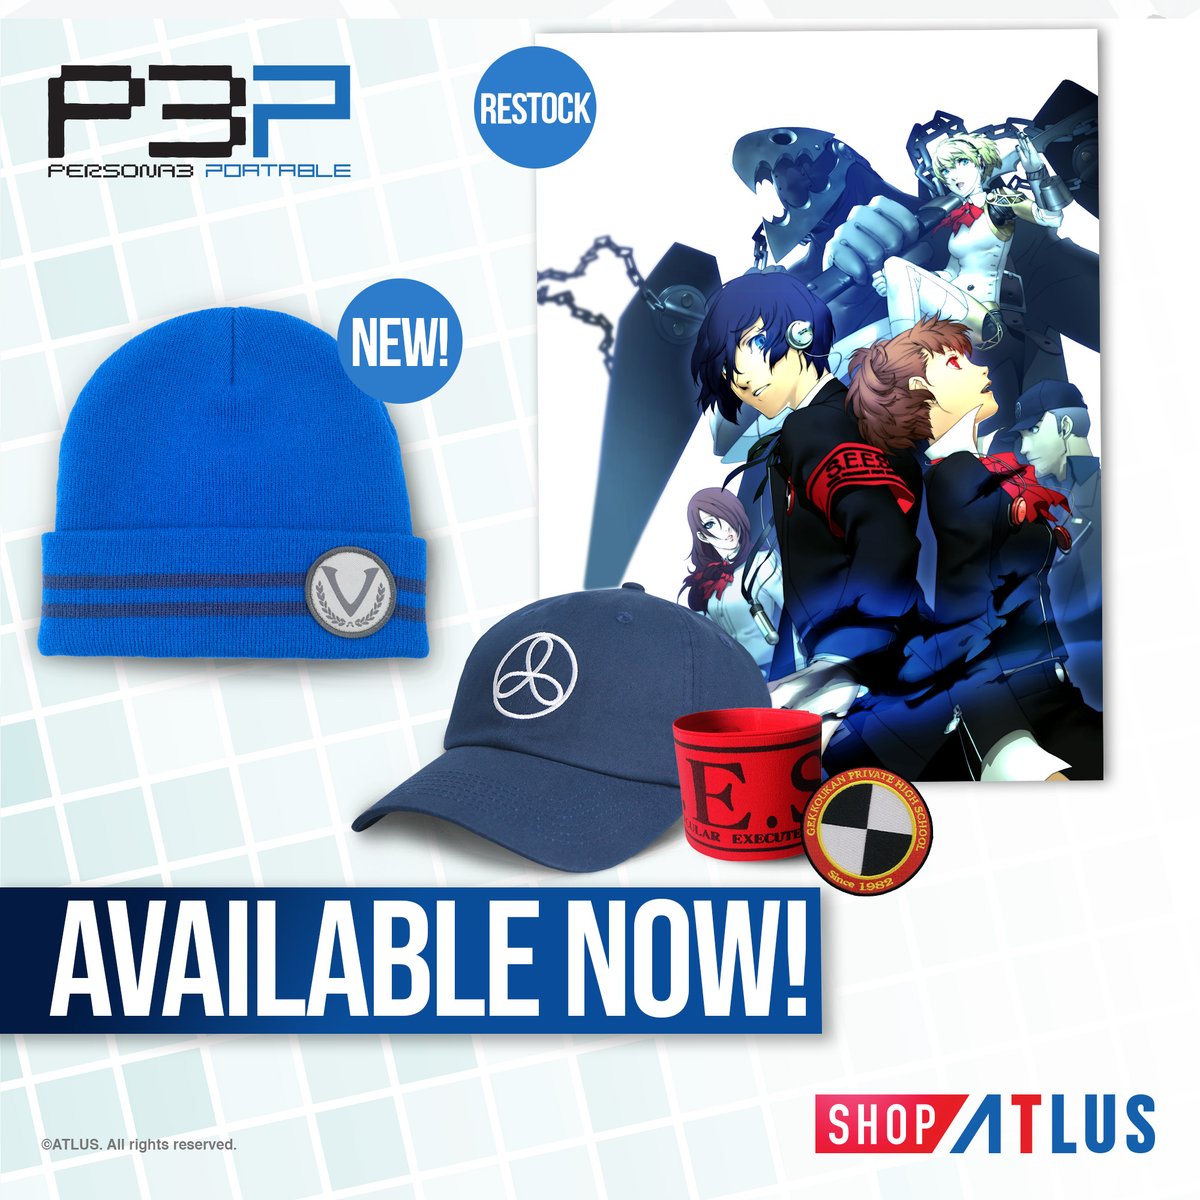 Our Persona 3 Portable Collection is back stock, along with a new beanie inspired by the Velvet Room! Don’t miss your chance to grab yours! 💙

#Persona3Portable #P3P #Persona3 #P3